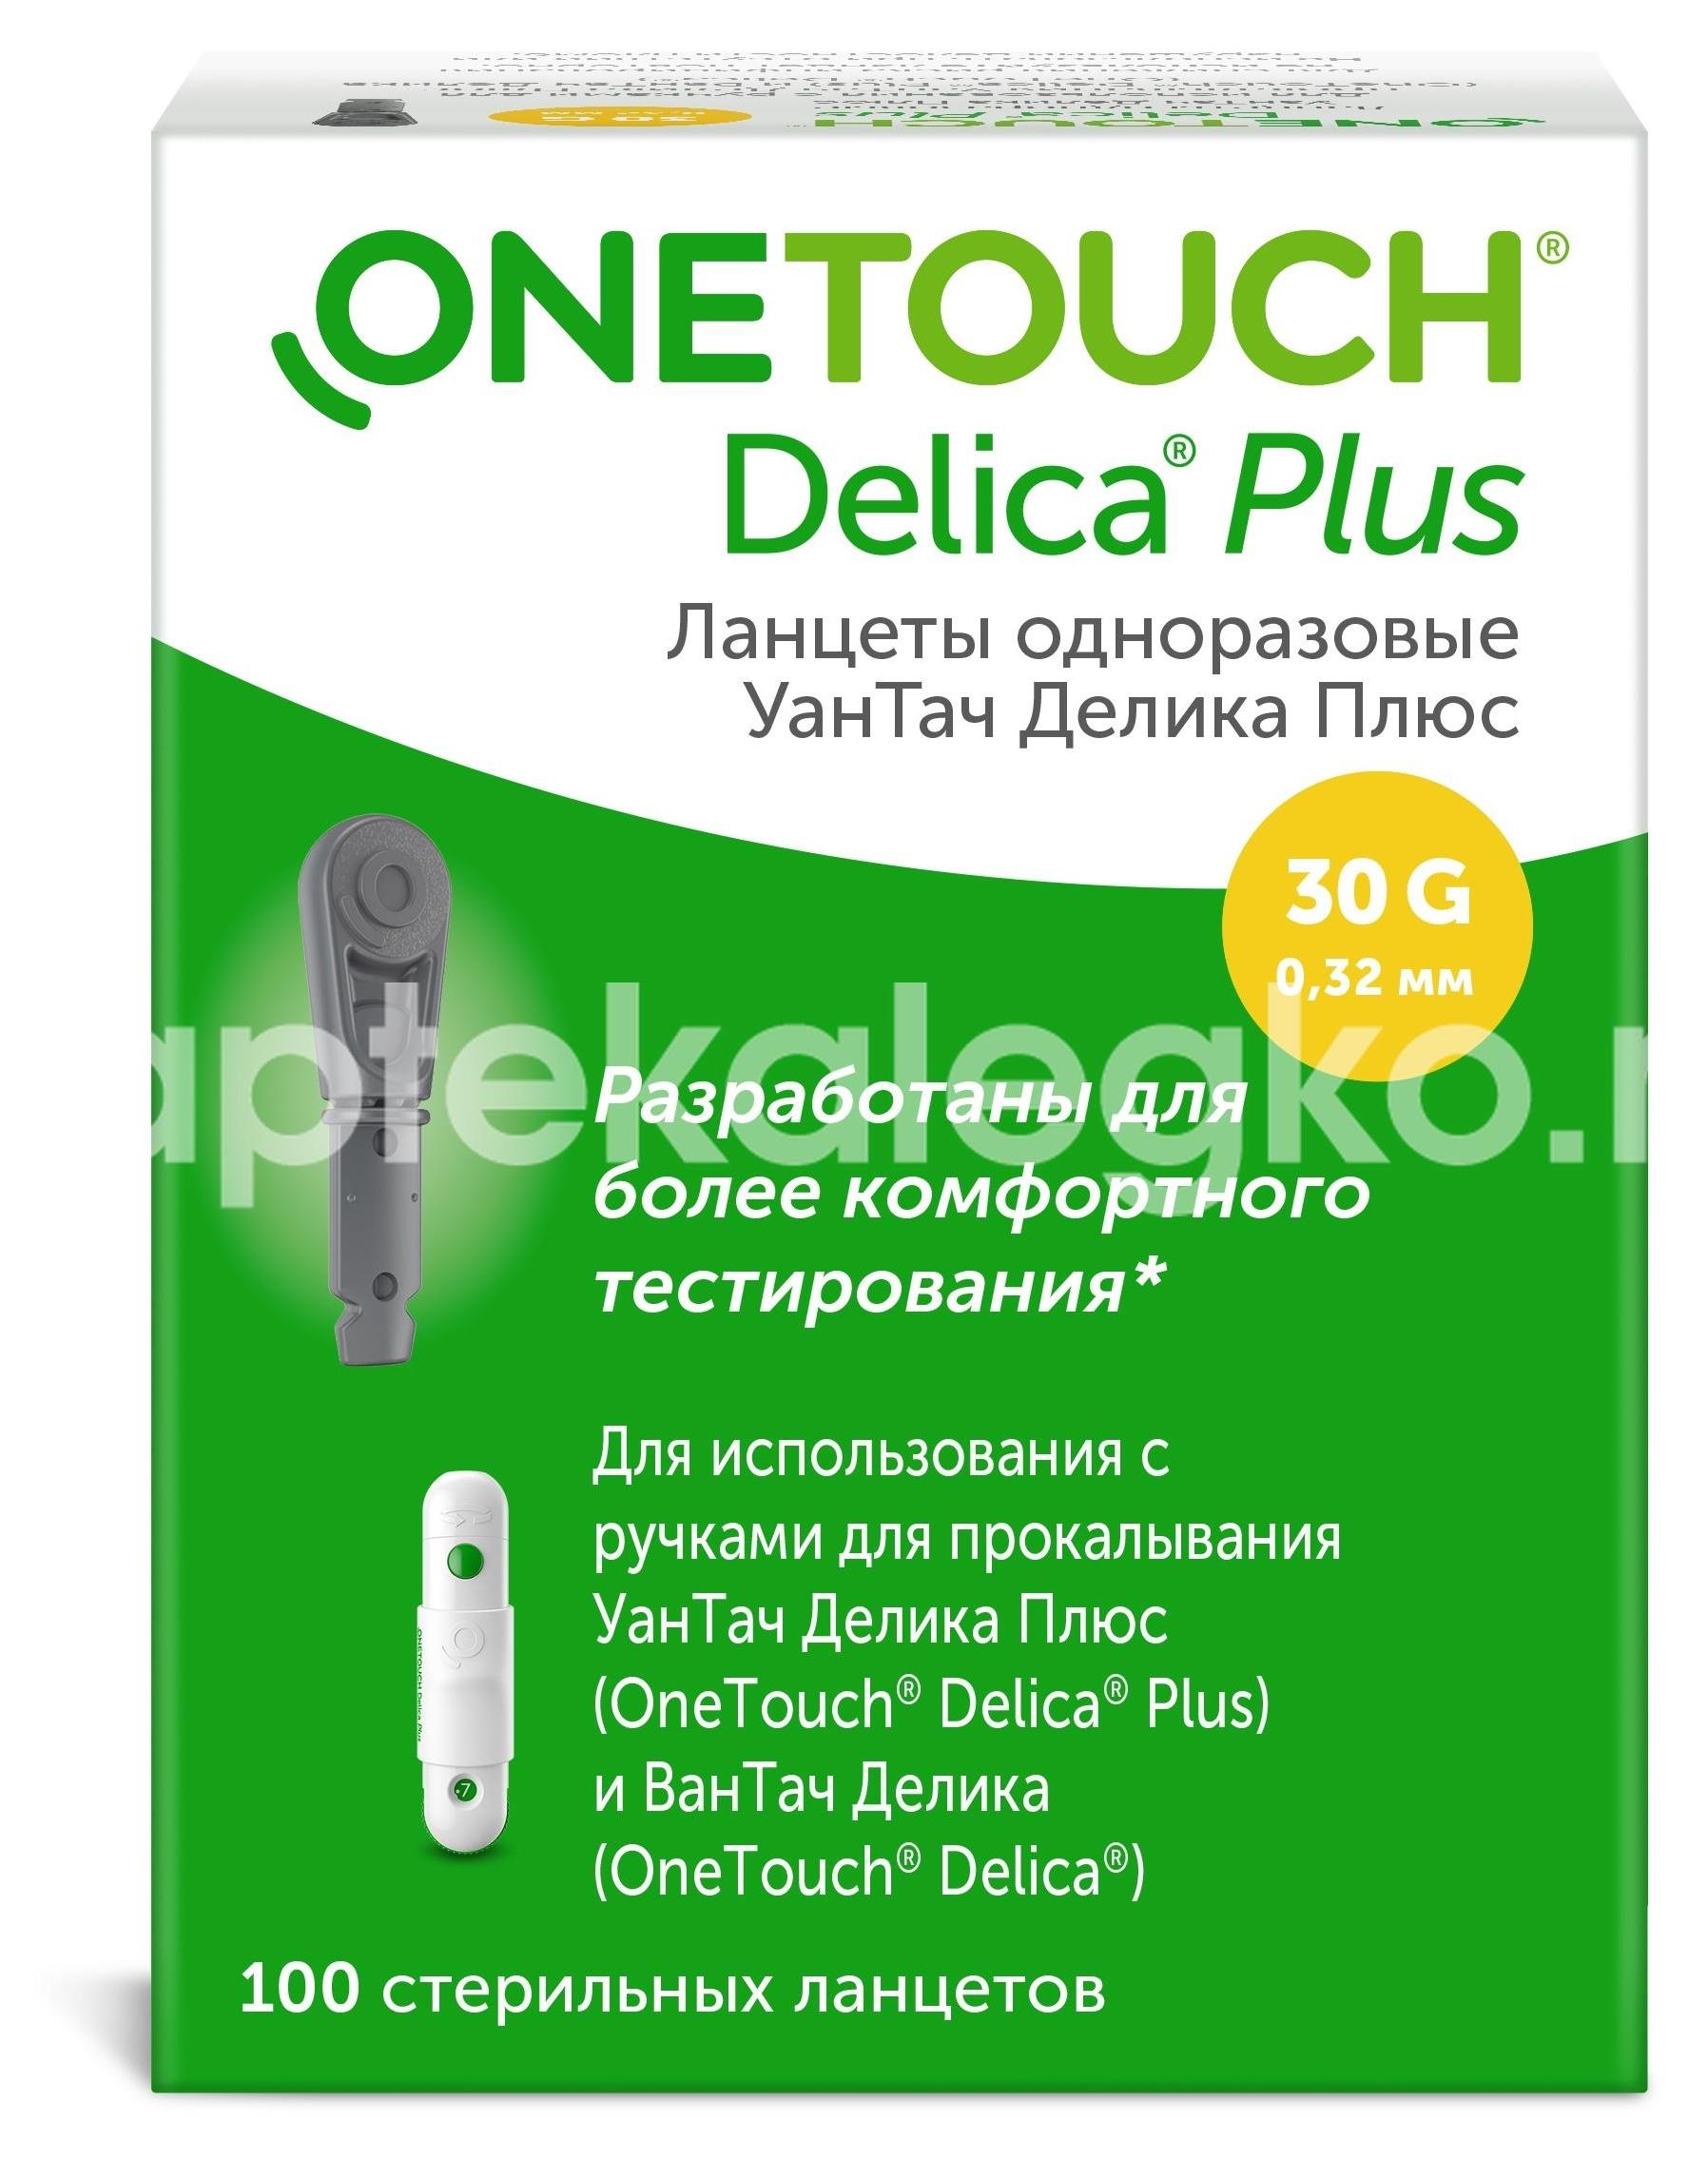 Onetouch delica. Ланцеты ONETOUCH Delica Plus №100. Ланцеты one Touch Delica Plus n25. Ланцеты one Touch Delica Plus №100. Ланцеты ONETOUCH Delica Plus №25.